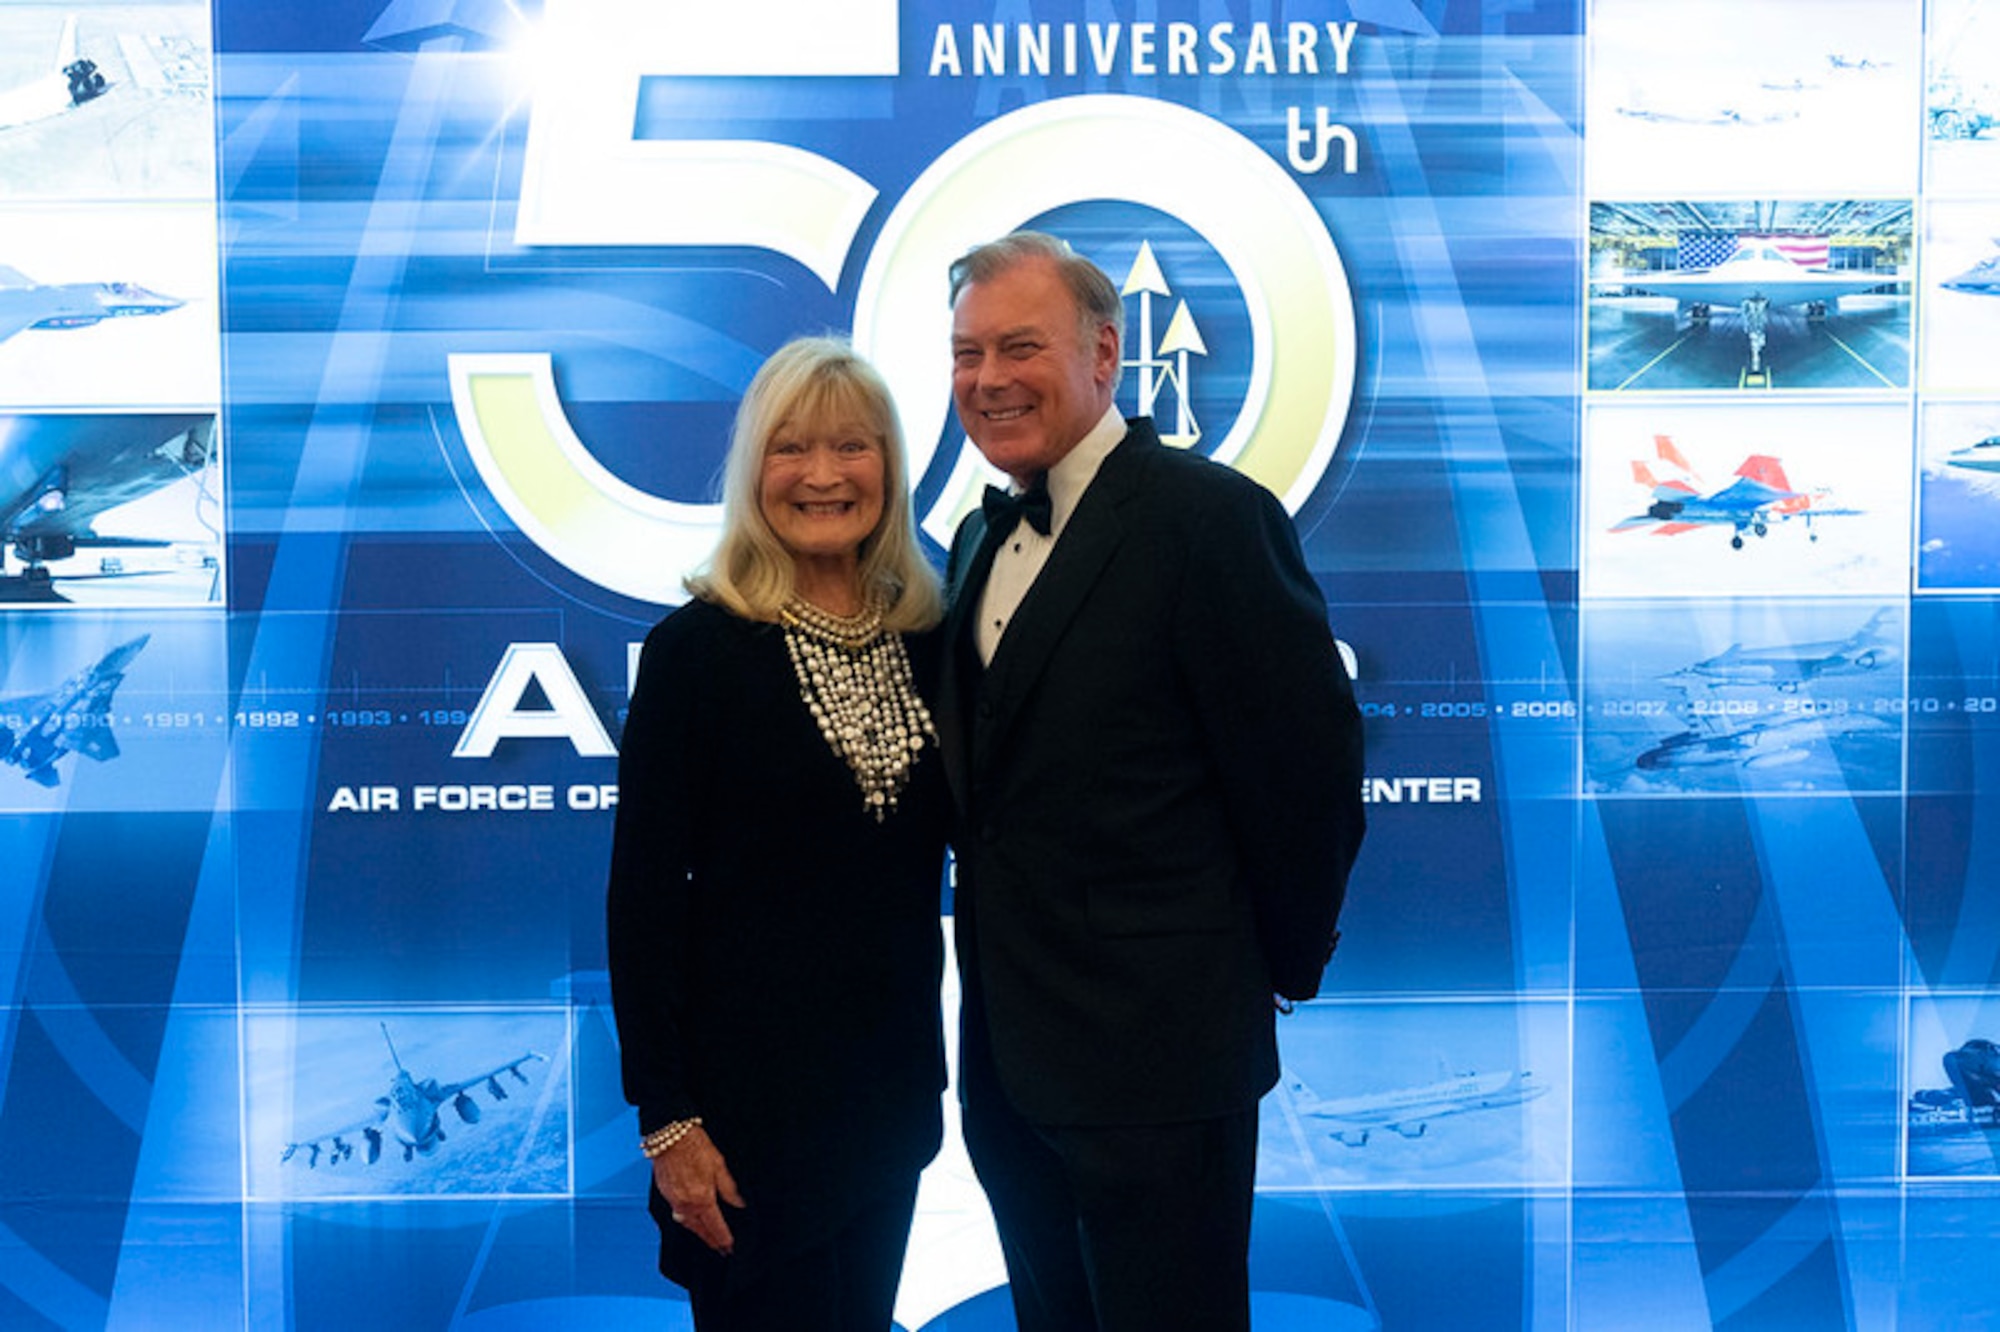 Retired Maj. Gen. Stephen T. Sargeant and his wife Vivienne attend the Air Force Operational Test and Evaluation Center 50th Anniversary Celebration held at the Sandia Resort in Albuquerque, N.M., on March 6, 2024. General Sargeant was the AFOTEC Commander from July 2007 to October 2010.